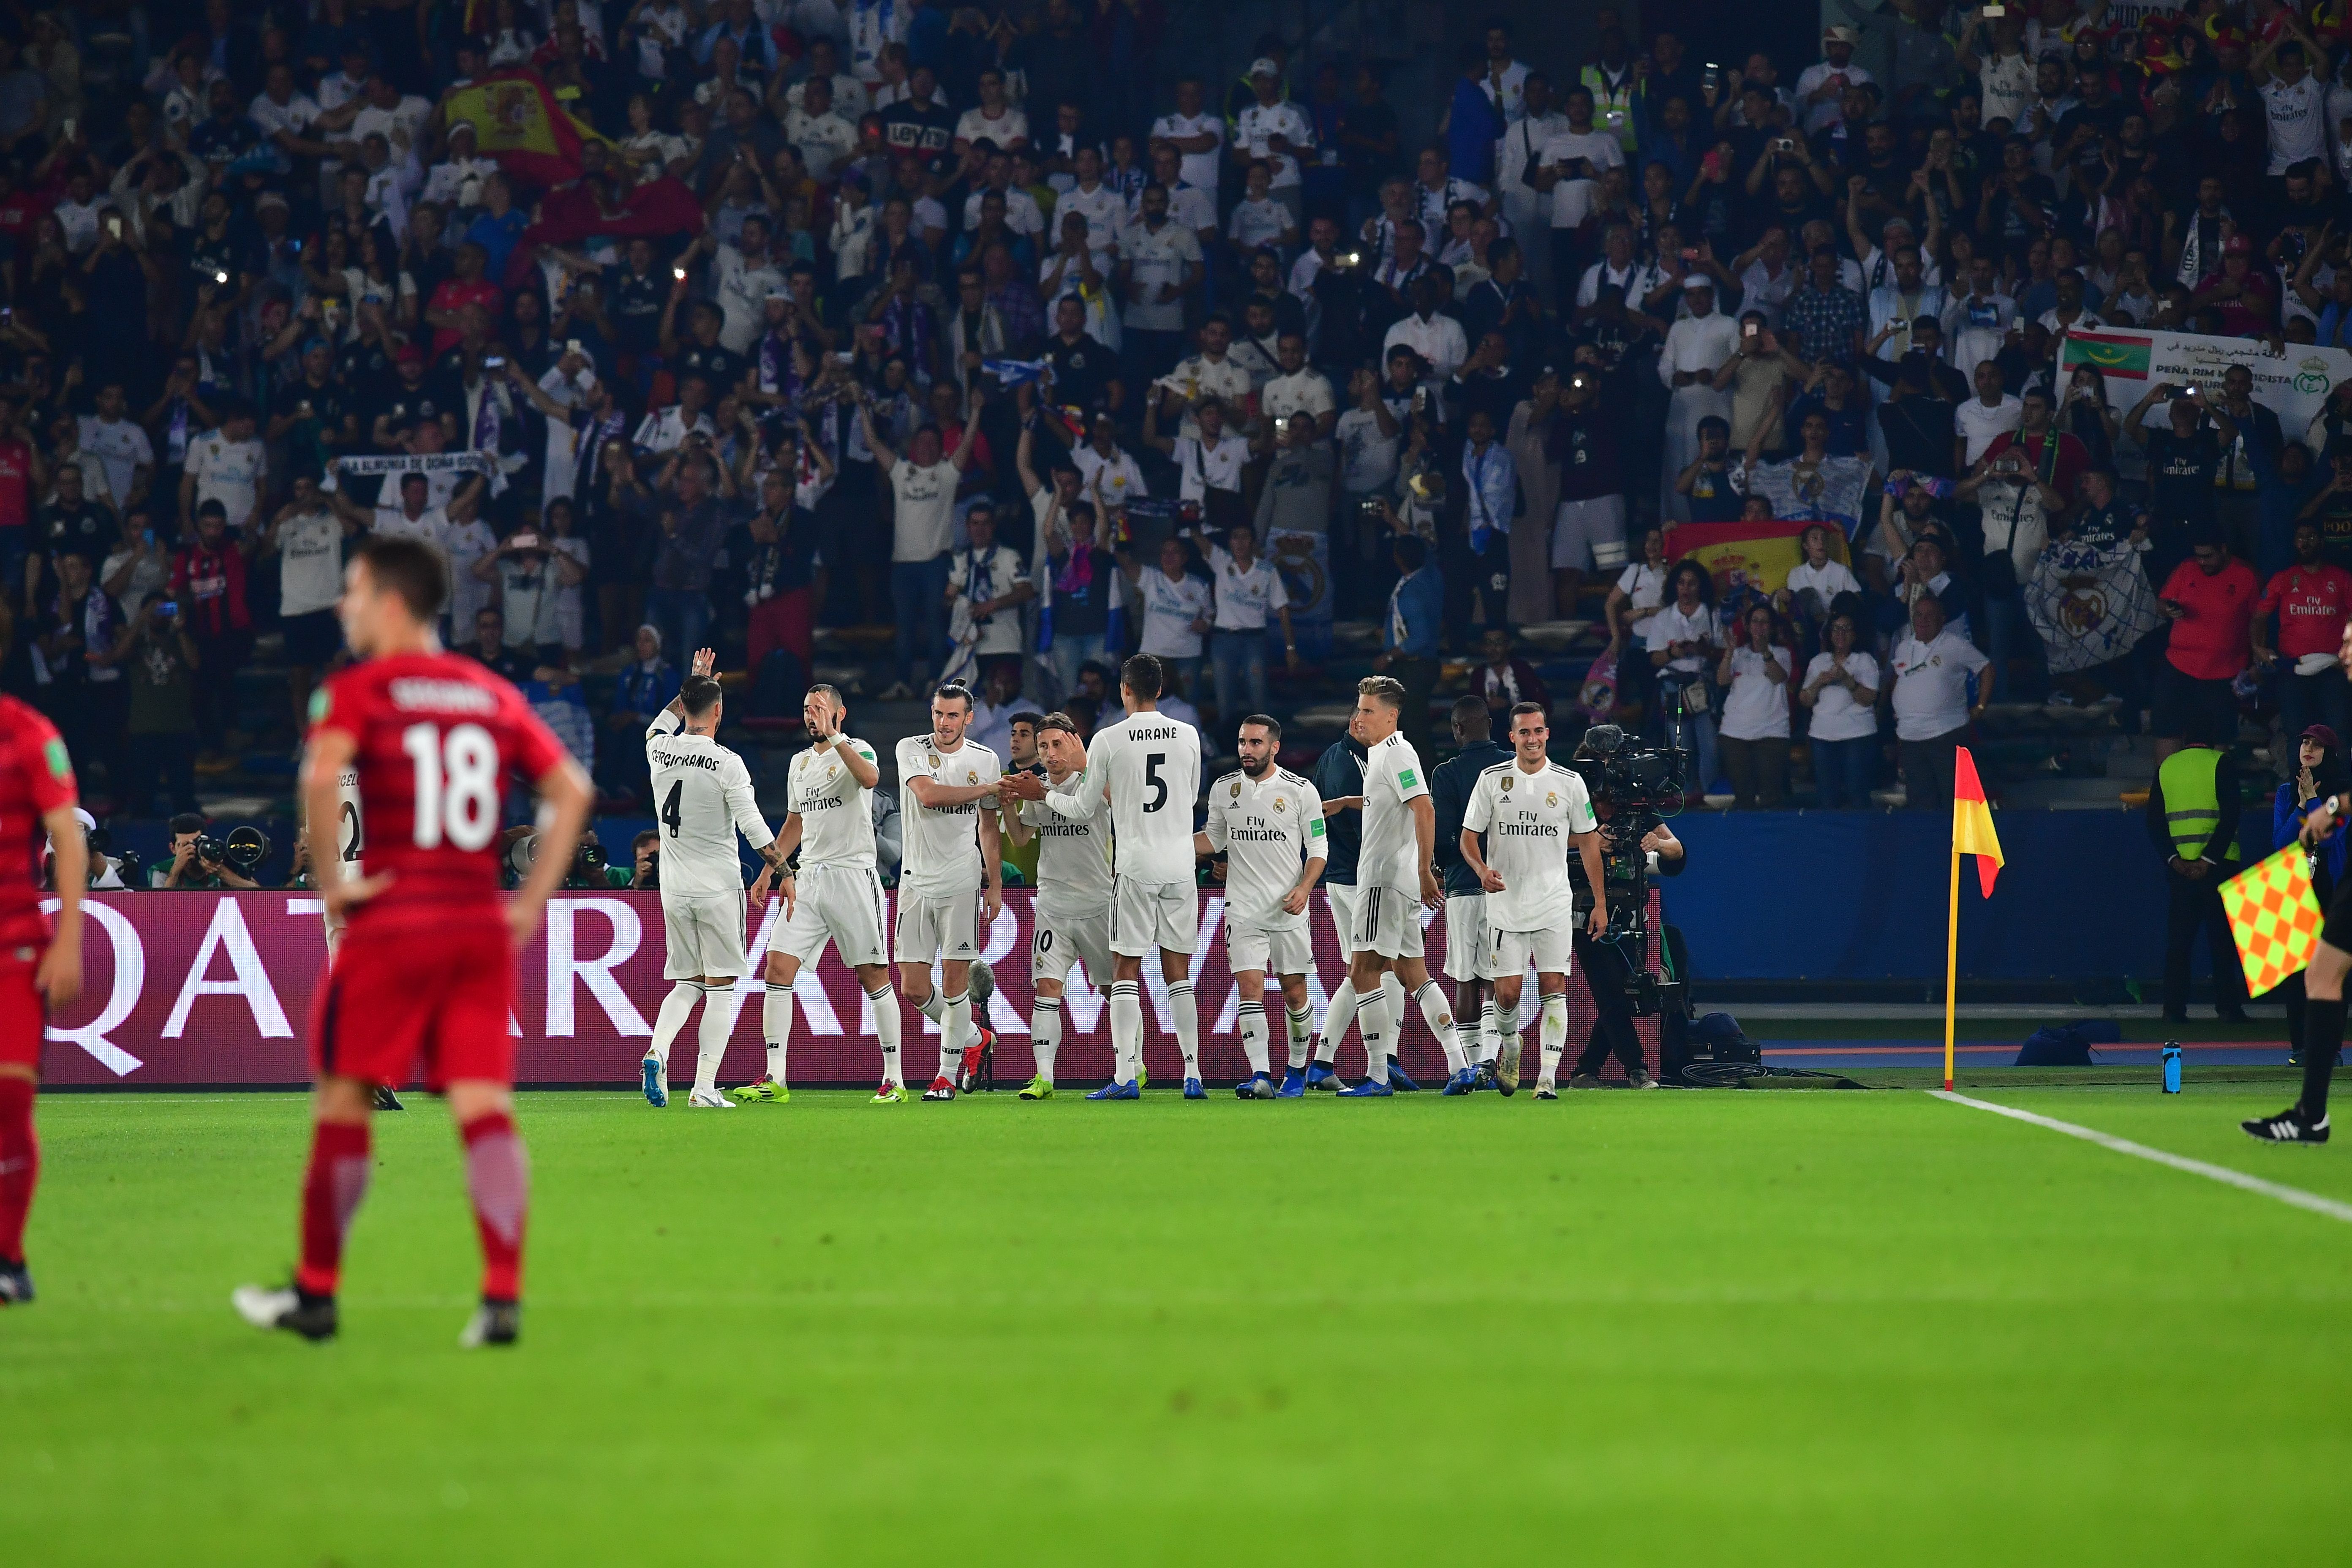 Real Madrid players celebrate their goal during the semi final football match of the FIFA Club World Cup 2018 tournament between Japan's Kashima Antlers and Spain's Real Madrid at the Zayed Sports City Stadium in Abu Dhabi, the capital of the United Arab Emirates, on December 19, 2018. (Photo by Giuseppe CACACE / AFP)        (Photo credit should read GIUSEPPE CACACE/AFP/Getty Images)